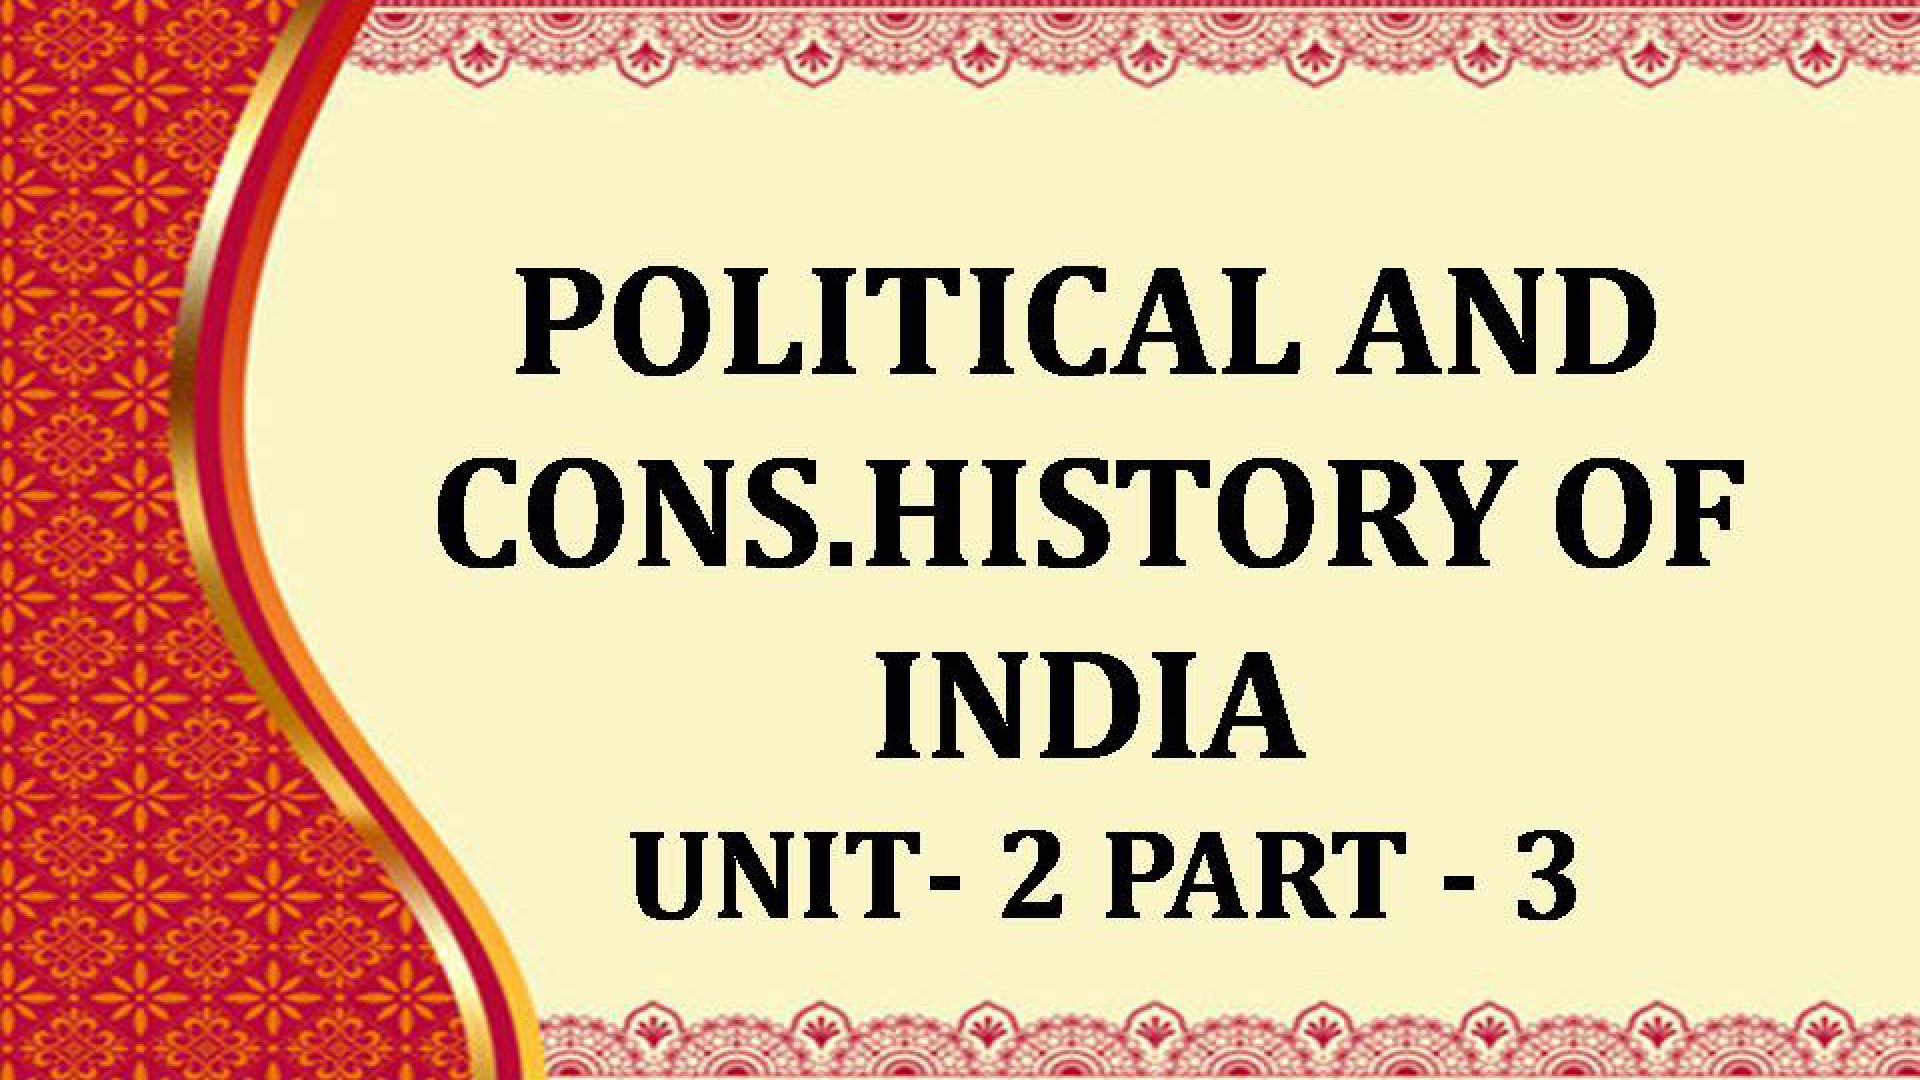 POLITICAL AND CONS.HISTORY OF INDIA UNIT 2-2